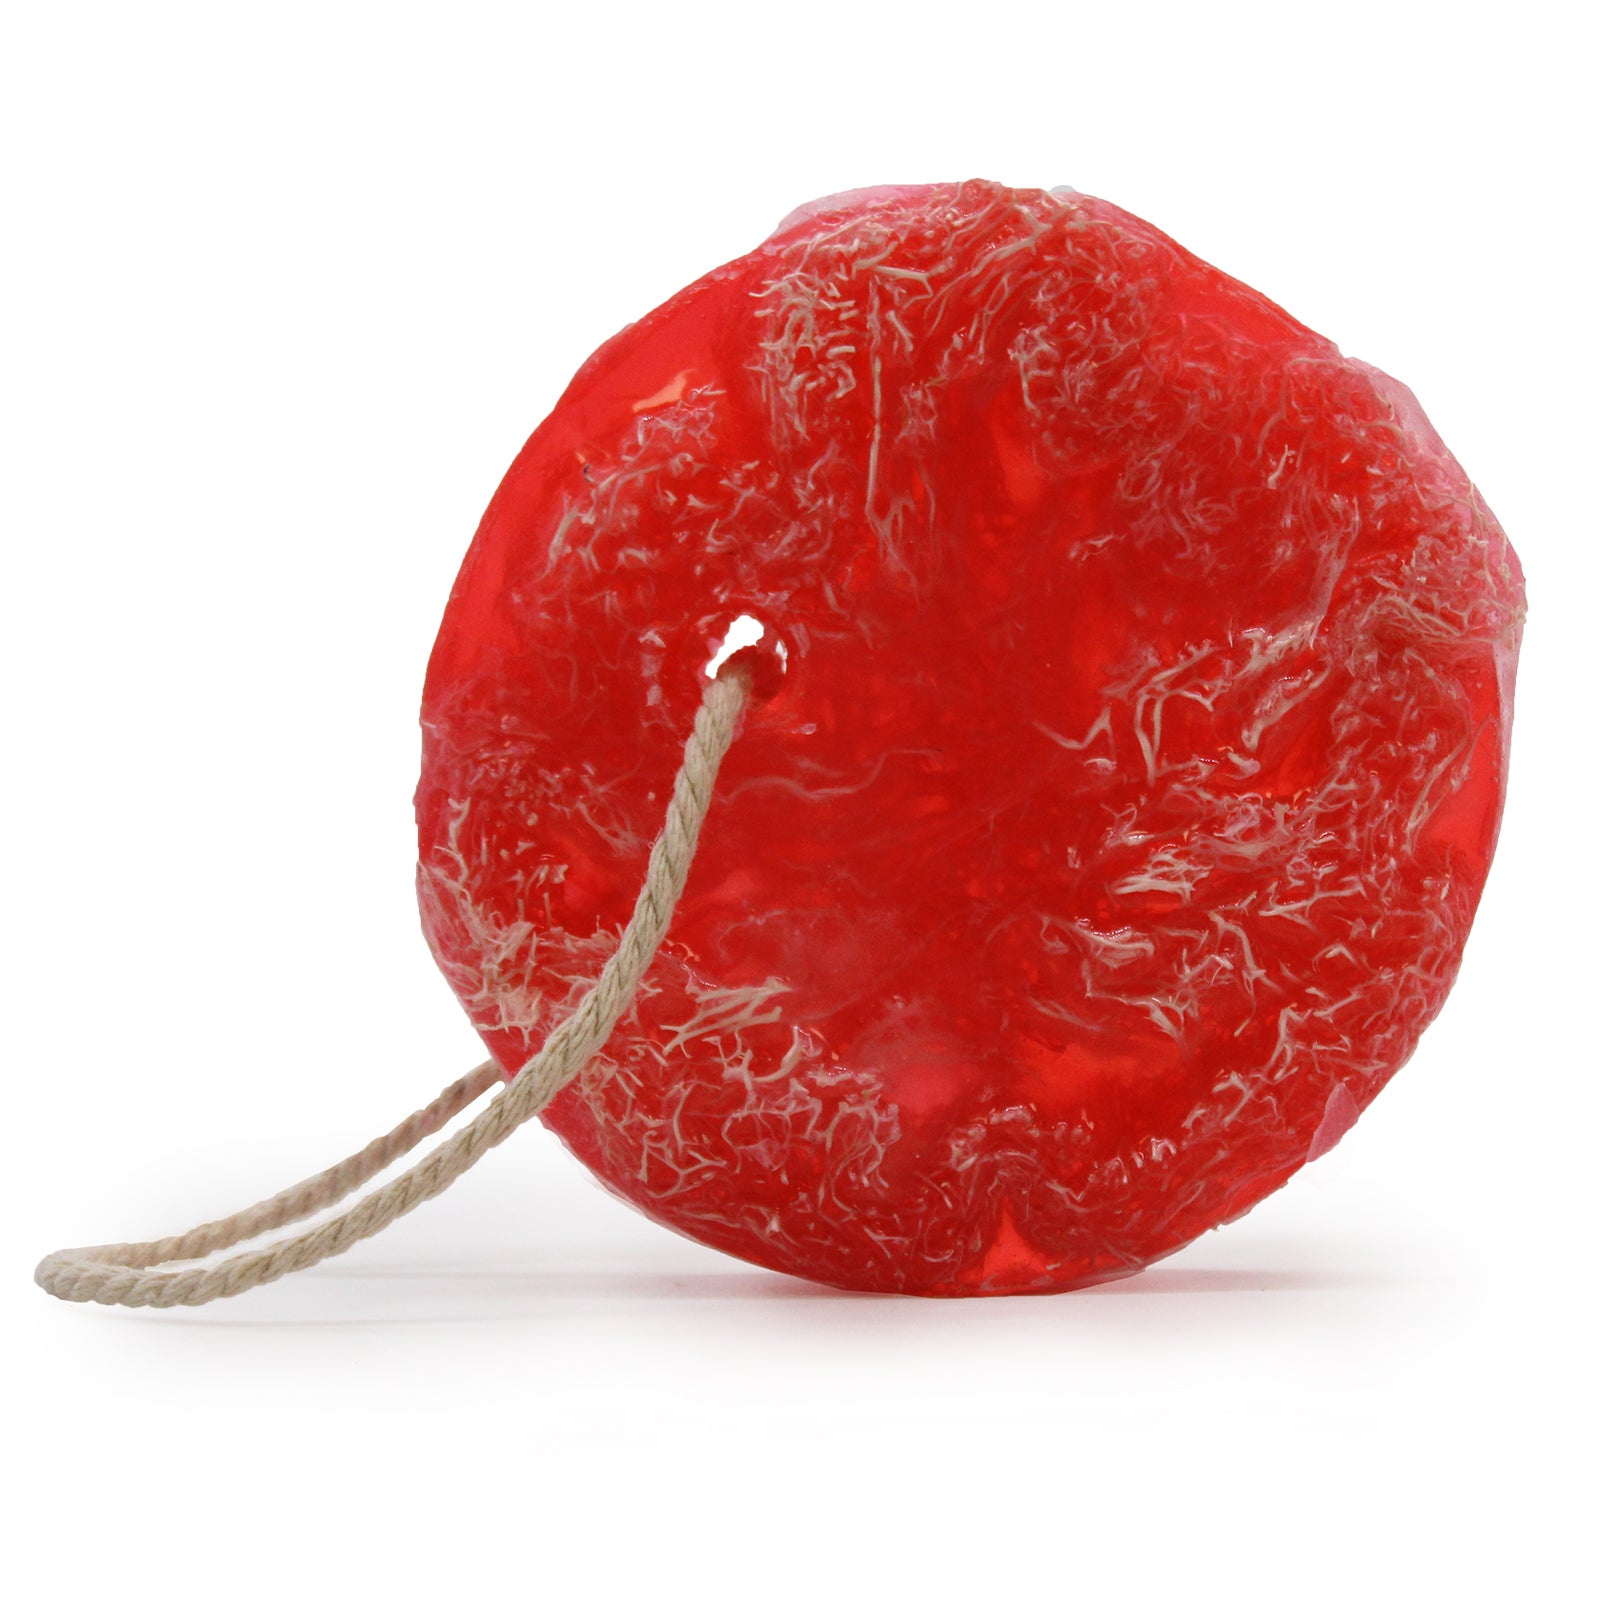 Fruity Scrub Soap on a Rope - LB Boutique